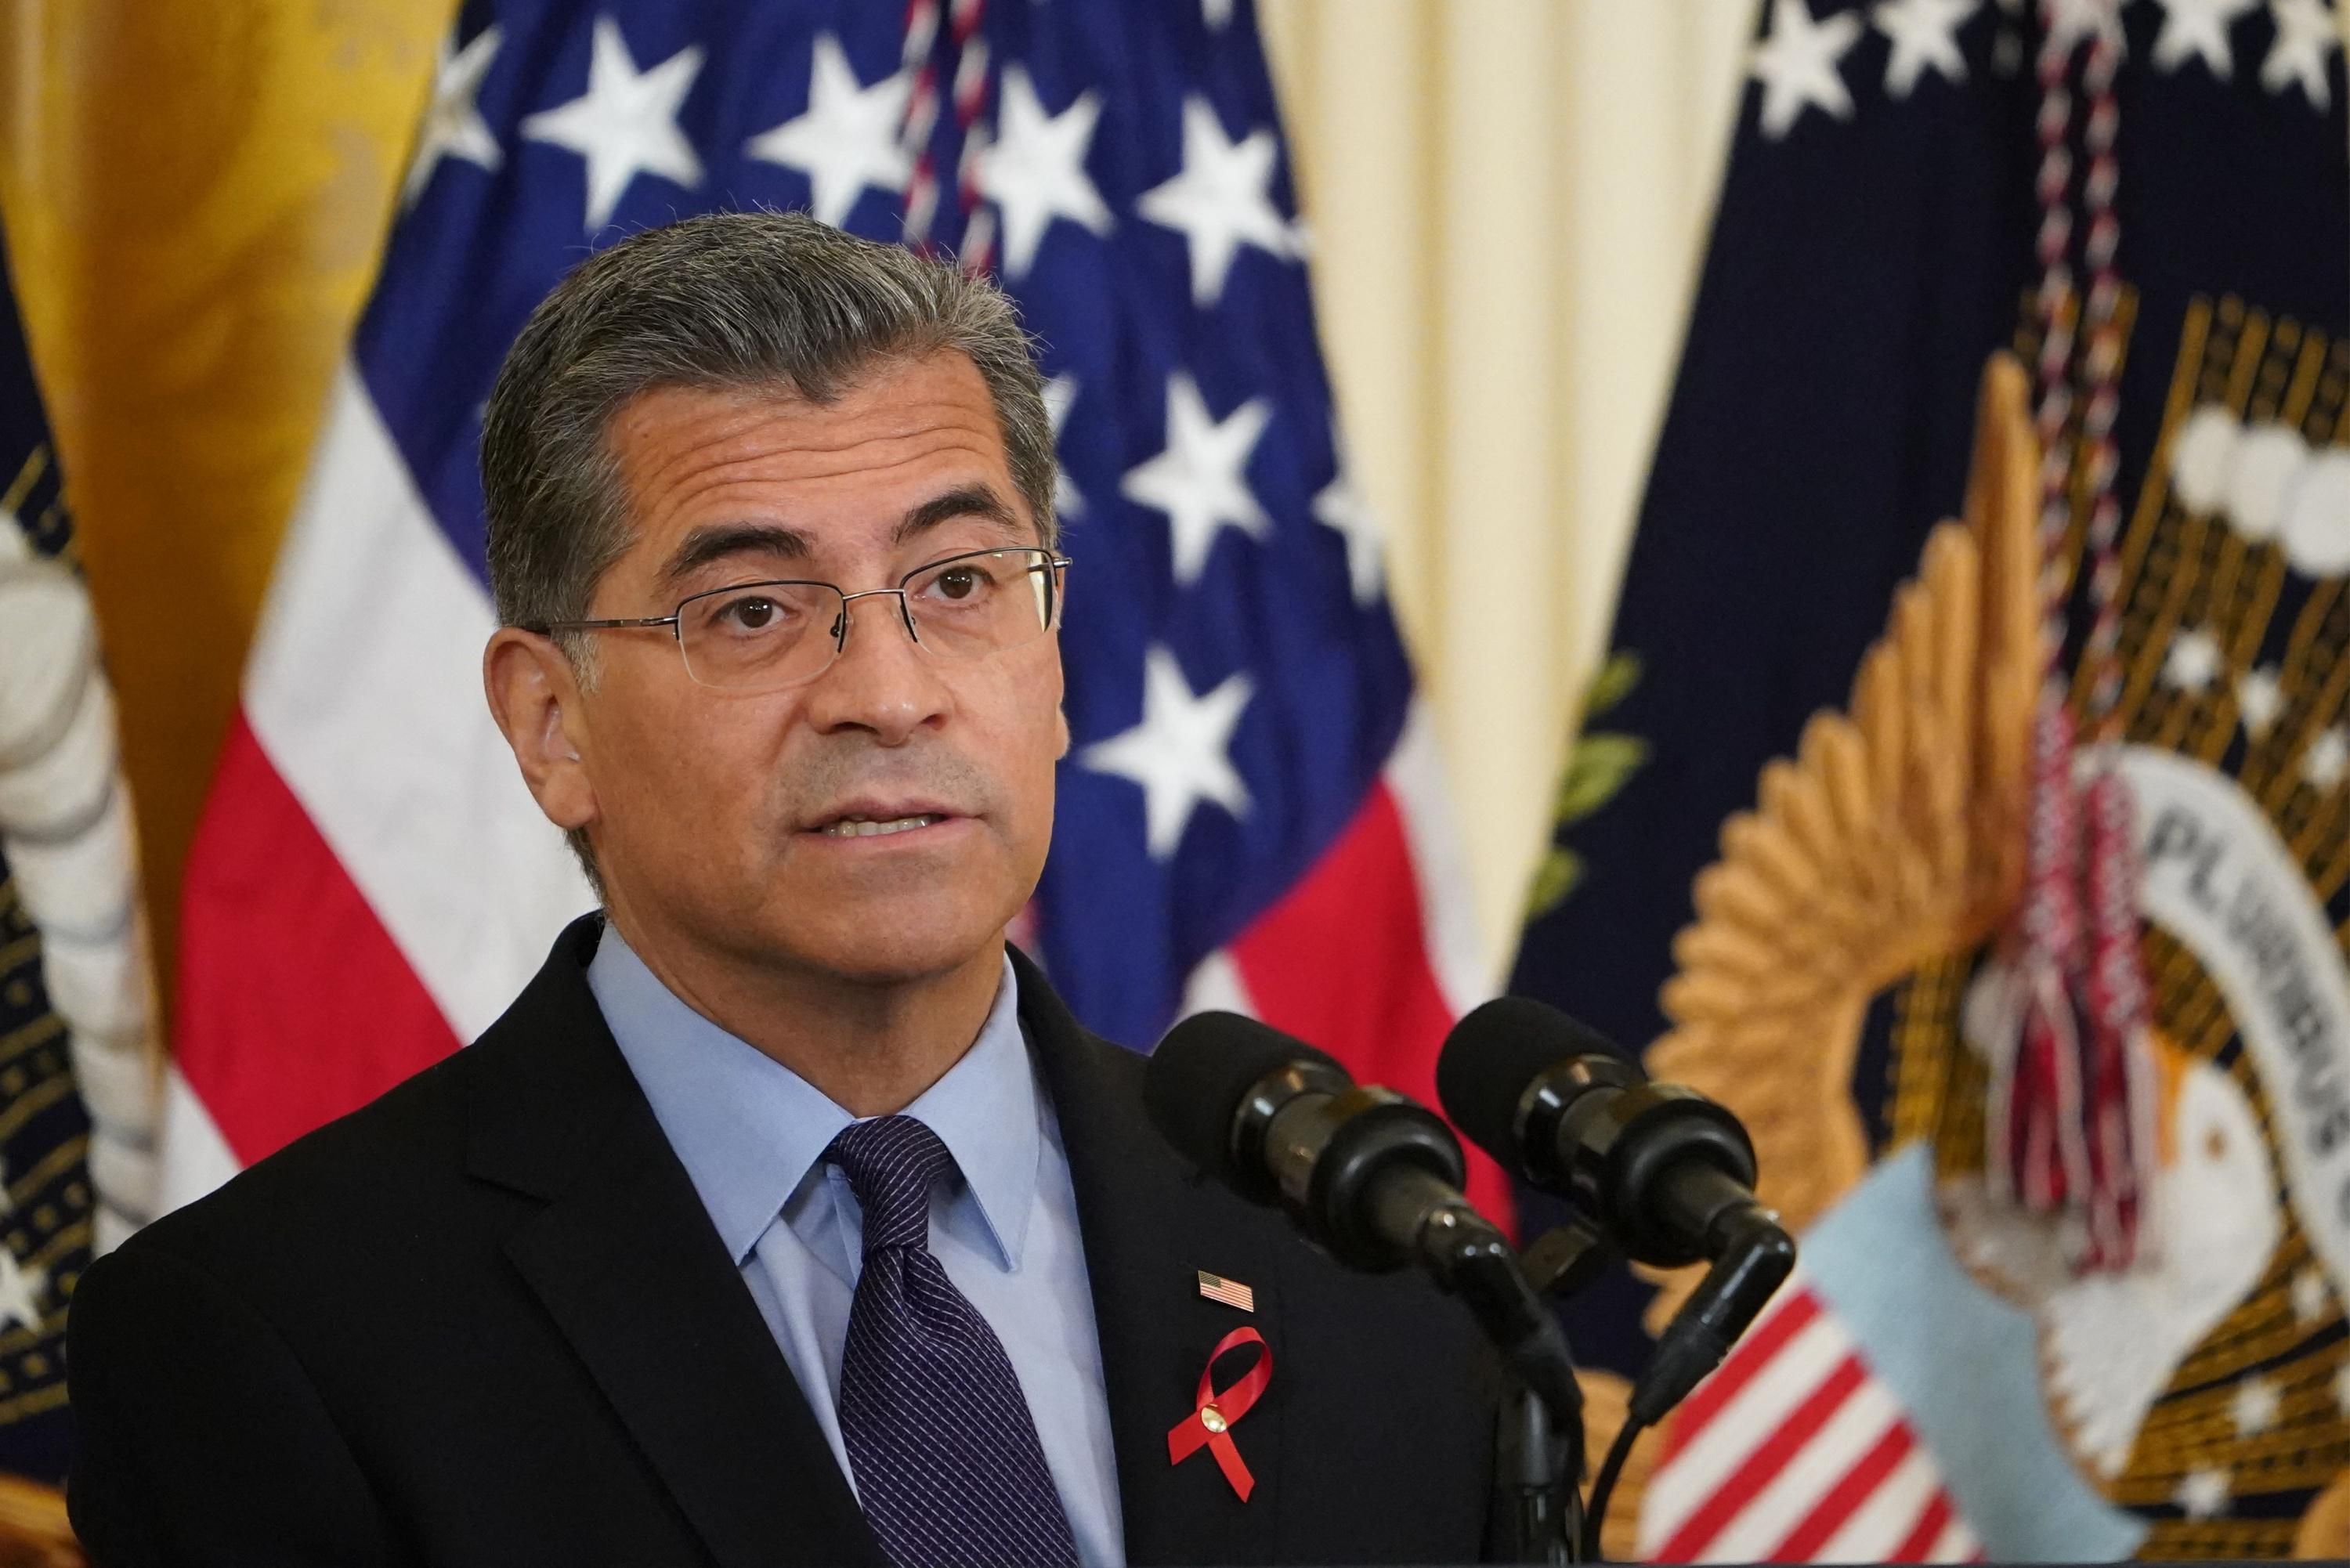 Health and Human Services Secretary Xavier Becerra speaks at an event